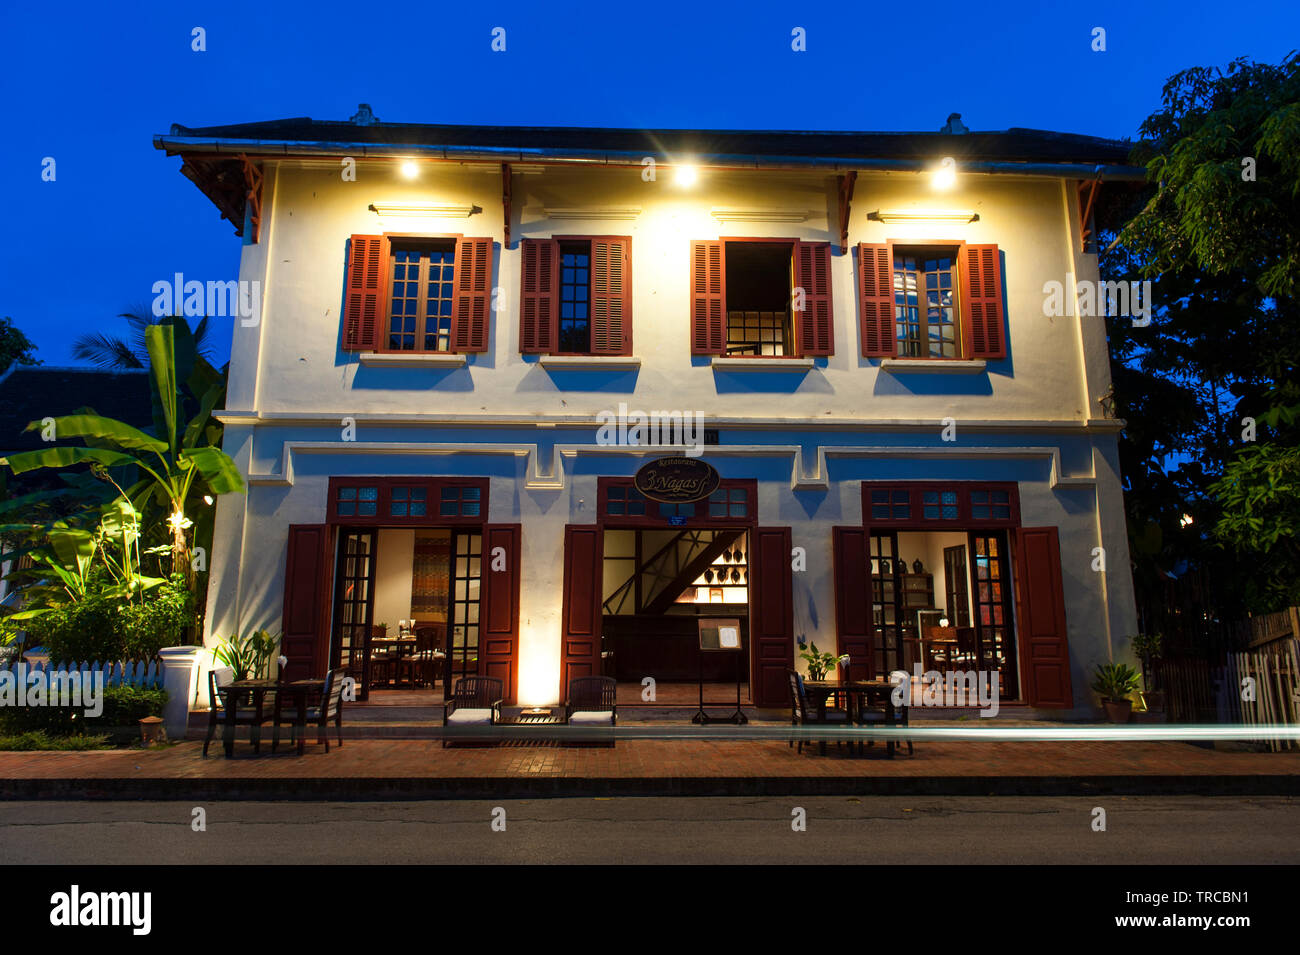 Exterior of the 3 Nagas Restaurant in Luang Prabang, a town with World Heritage status for its colonial era architecture, in the Lao PDR. Stock Photo